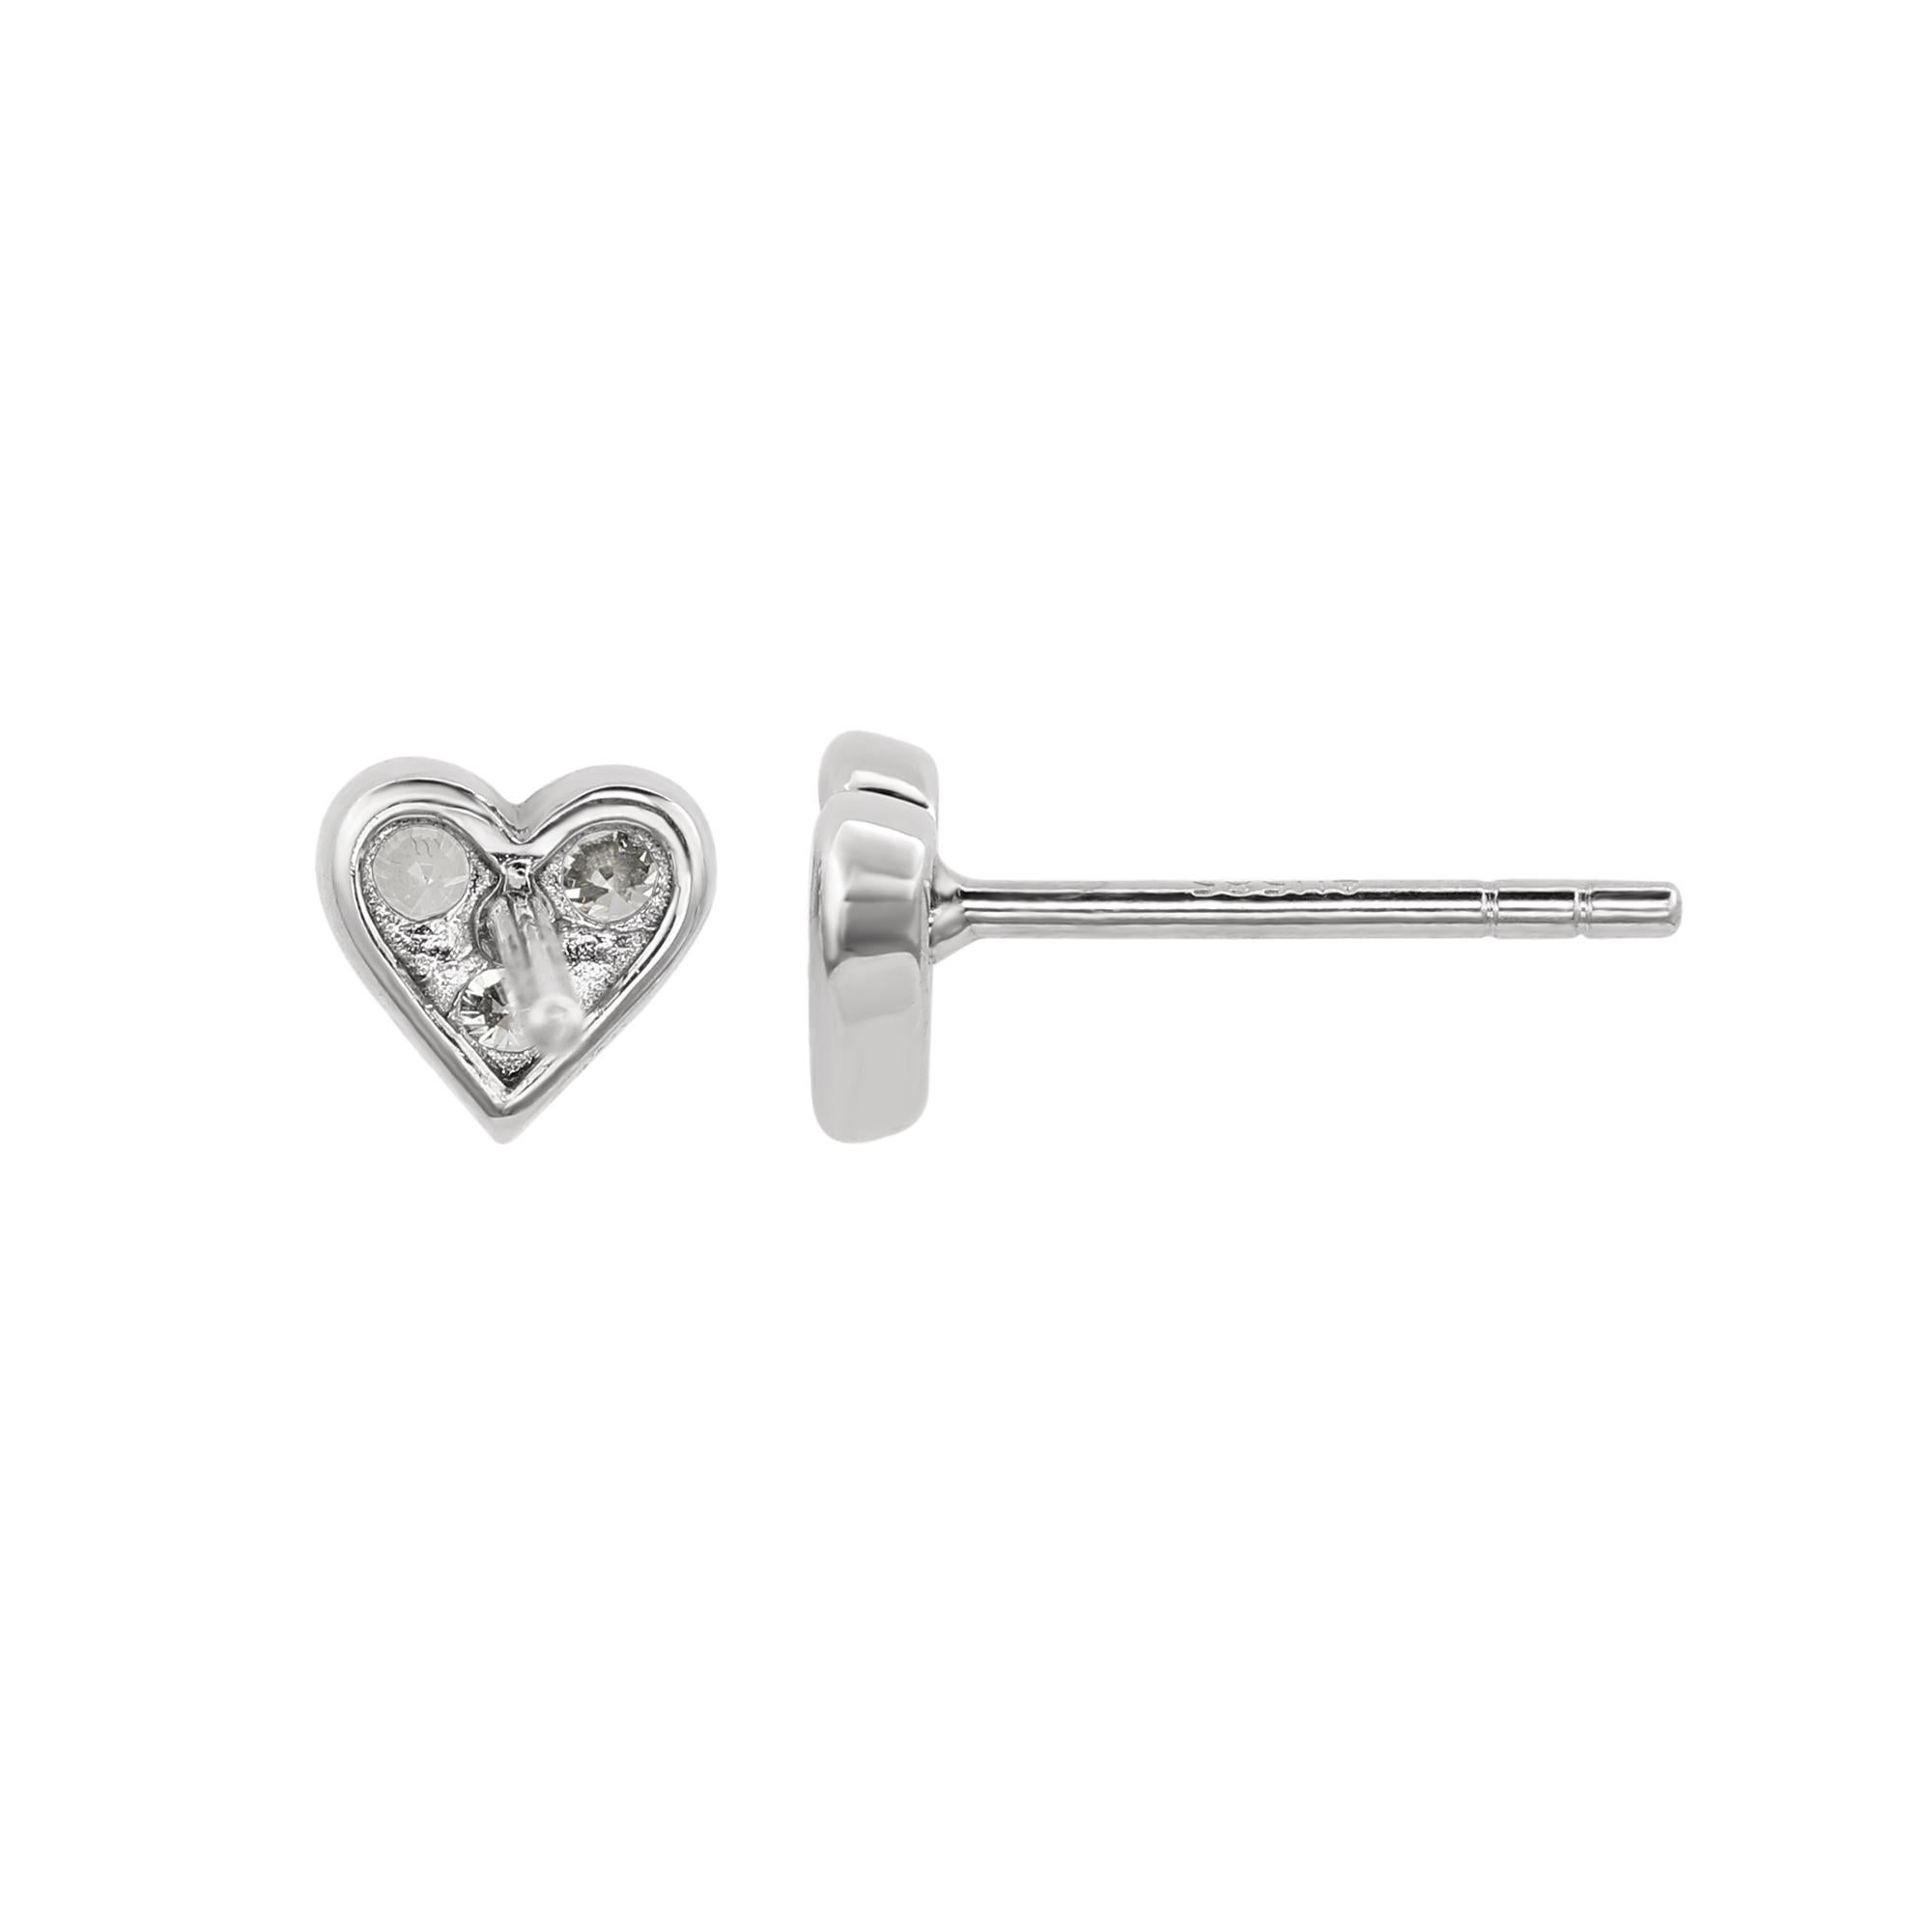 Add an elegant accent to your outfit with these sparkling Suzy Levian heart shape stud earrings featuring six round cut gorgeous white diamonds in a prong setting. The sparkling diamonds are hand set in 14-karat white gold, and weigh 0.30 cttw and